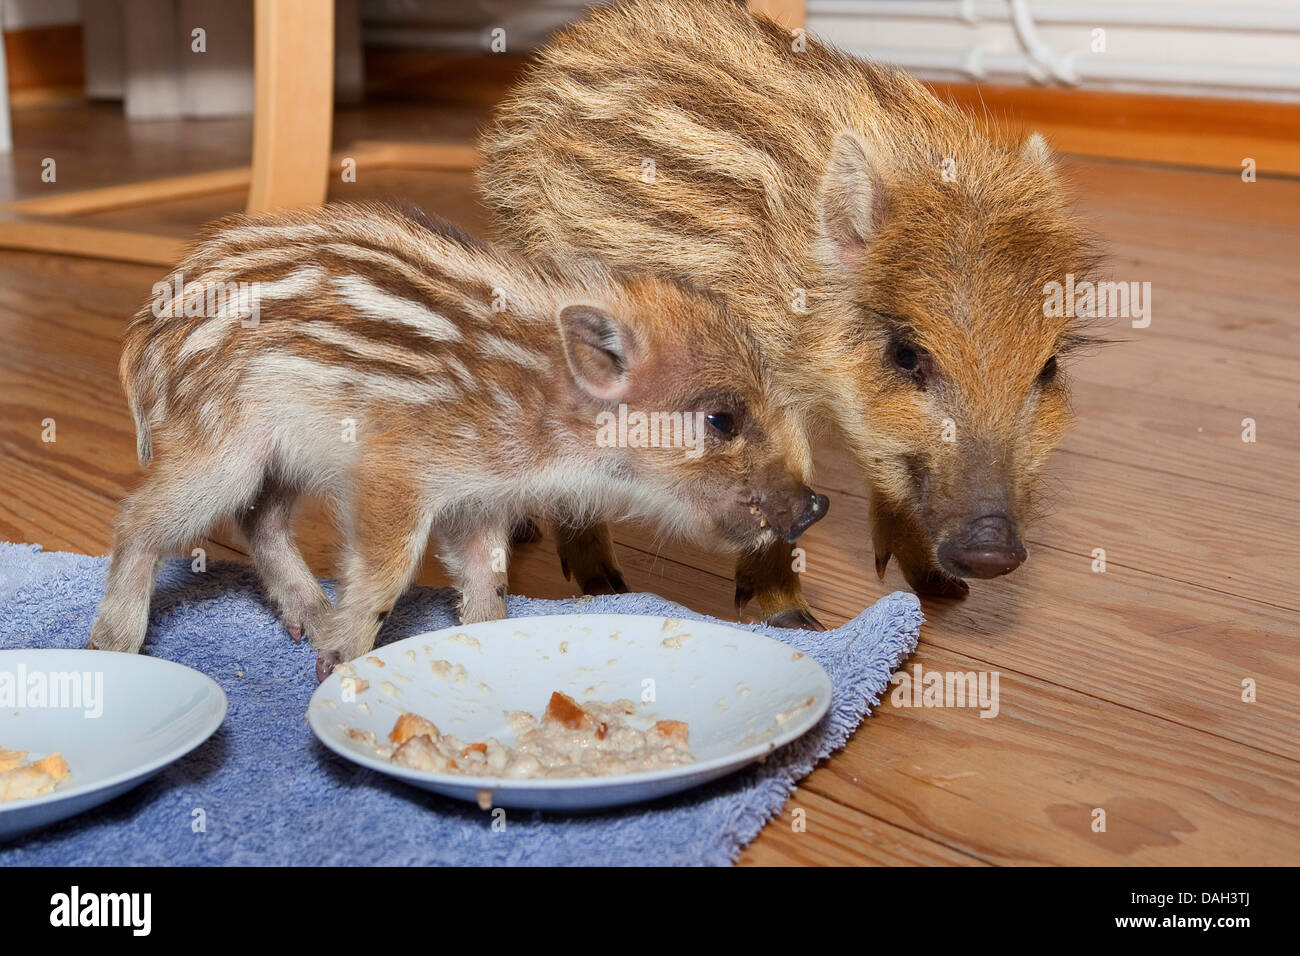 wild boar, pig, wild boar (Sus scrofa), orphaned tame runts living in a house and feeding rusk from a plate, Germany Stock Photo